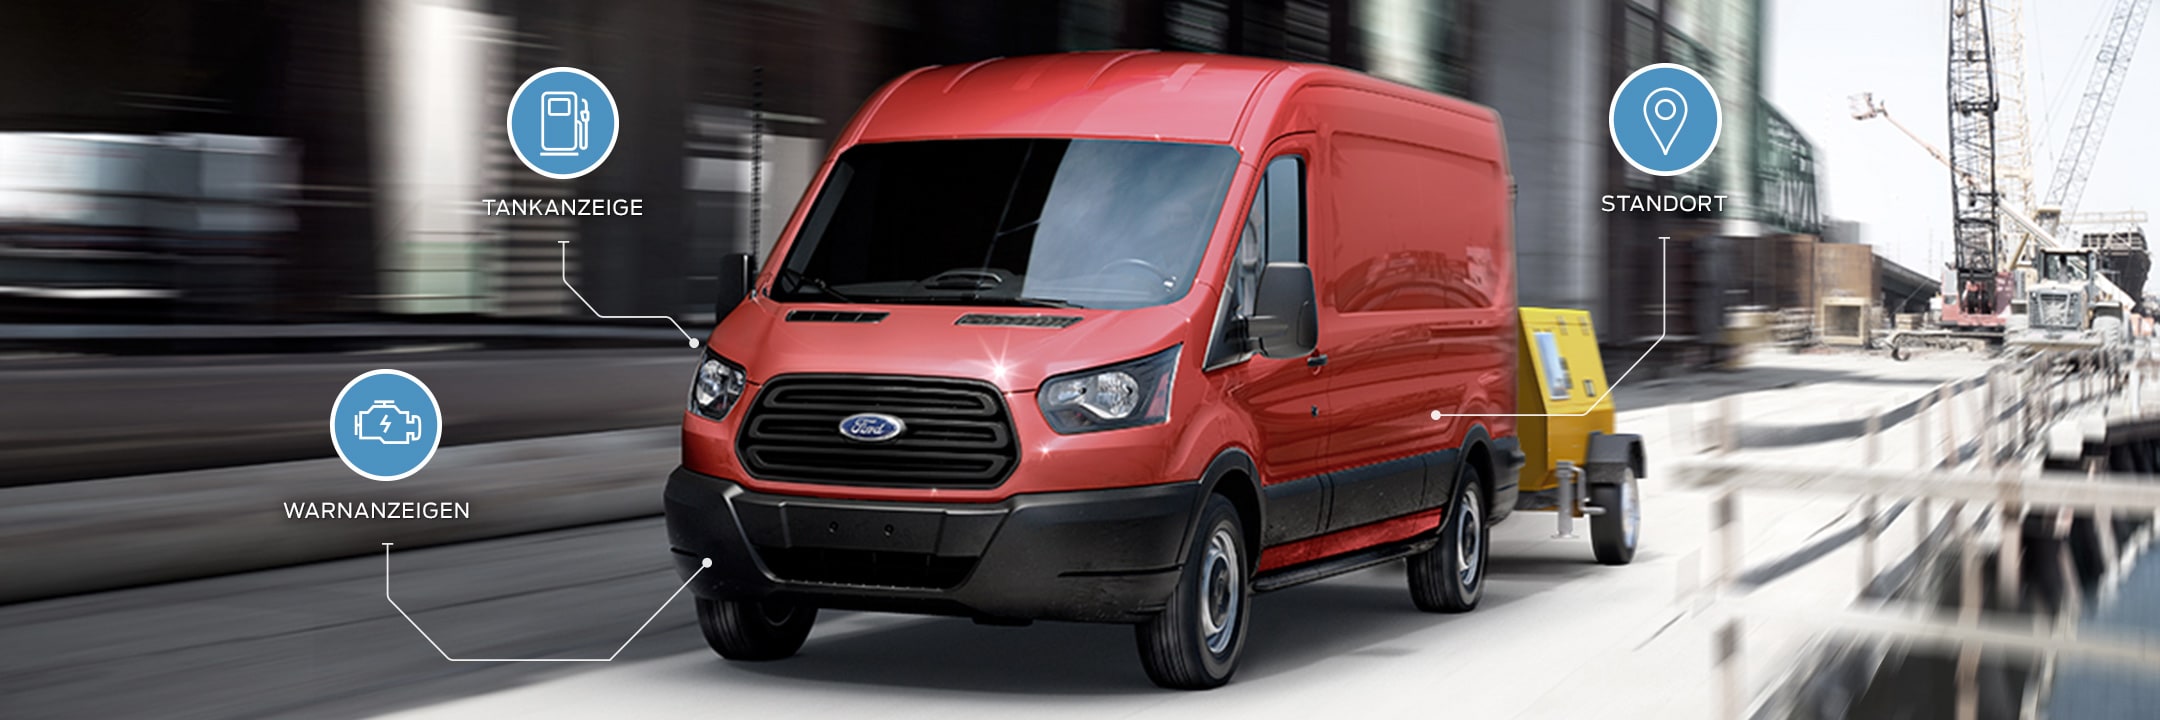 Ford Commercial Solution Data Service Red Transit Van